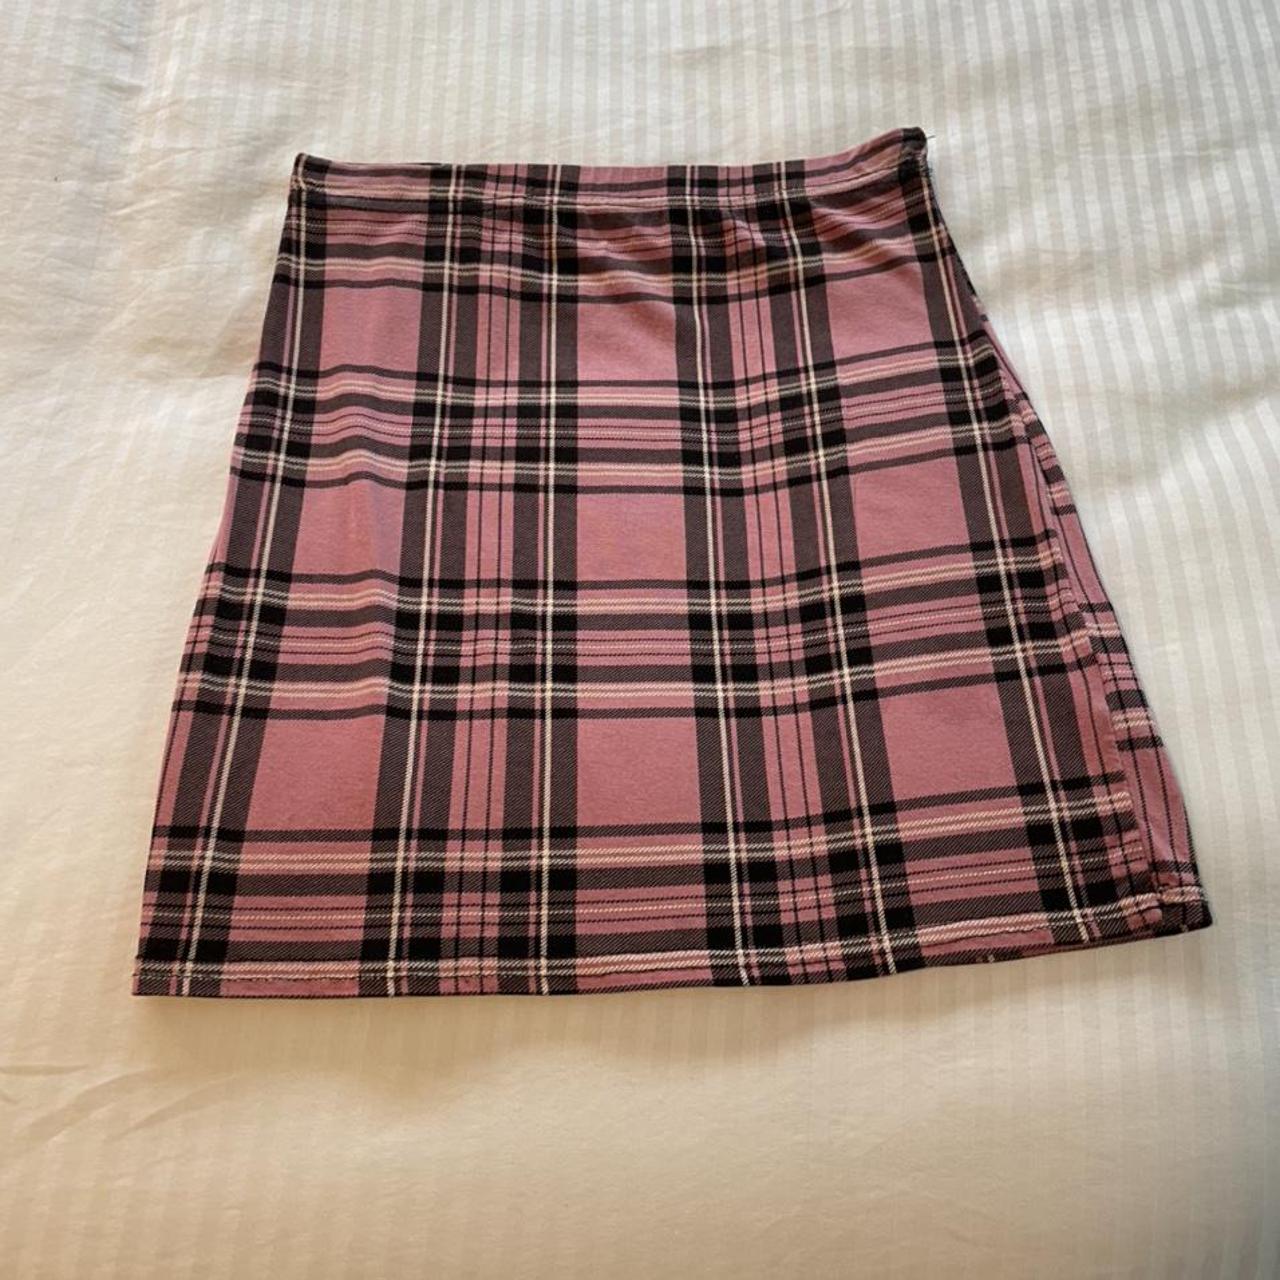 pink and black plaid mini skirt from Pretty Little... - Depop